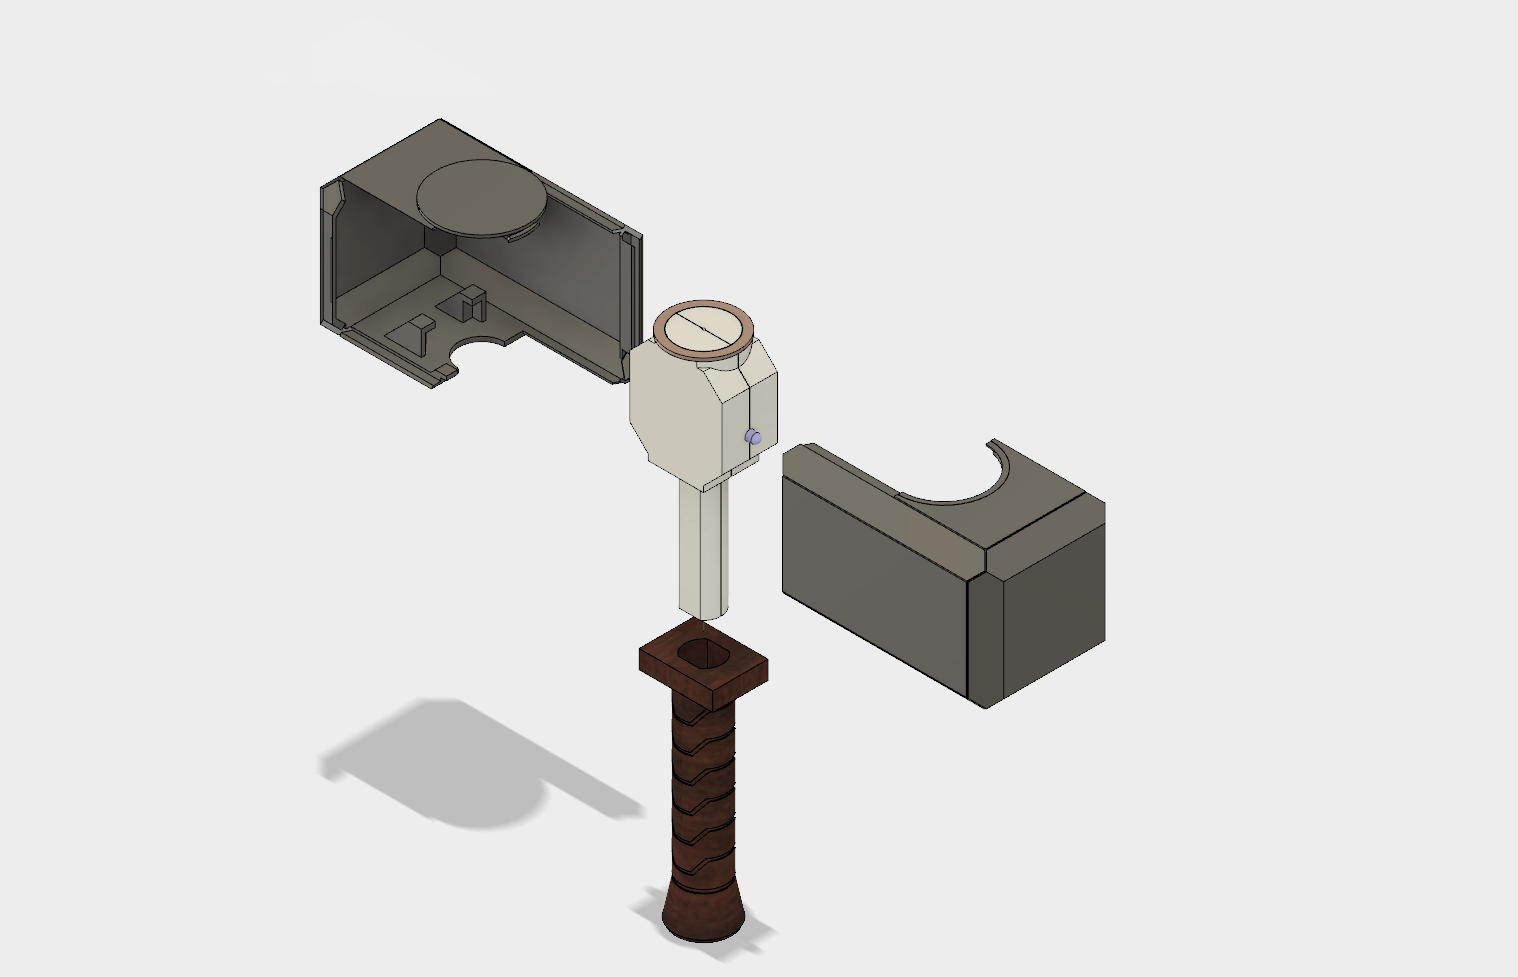 I really like the way the hammer fits together. A small part of the design was serendipitous.